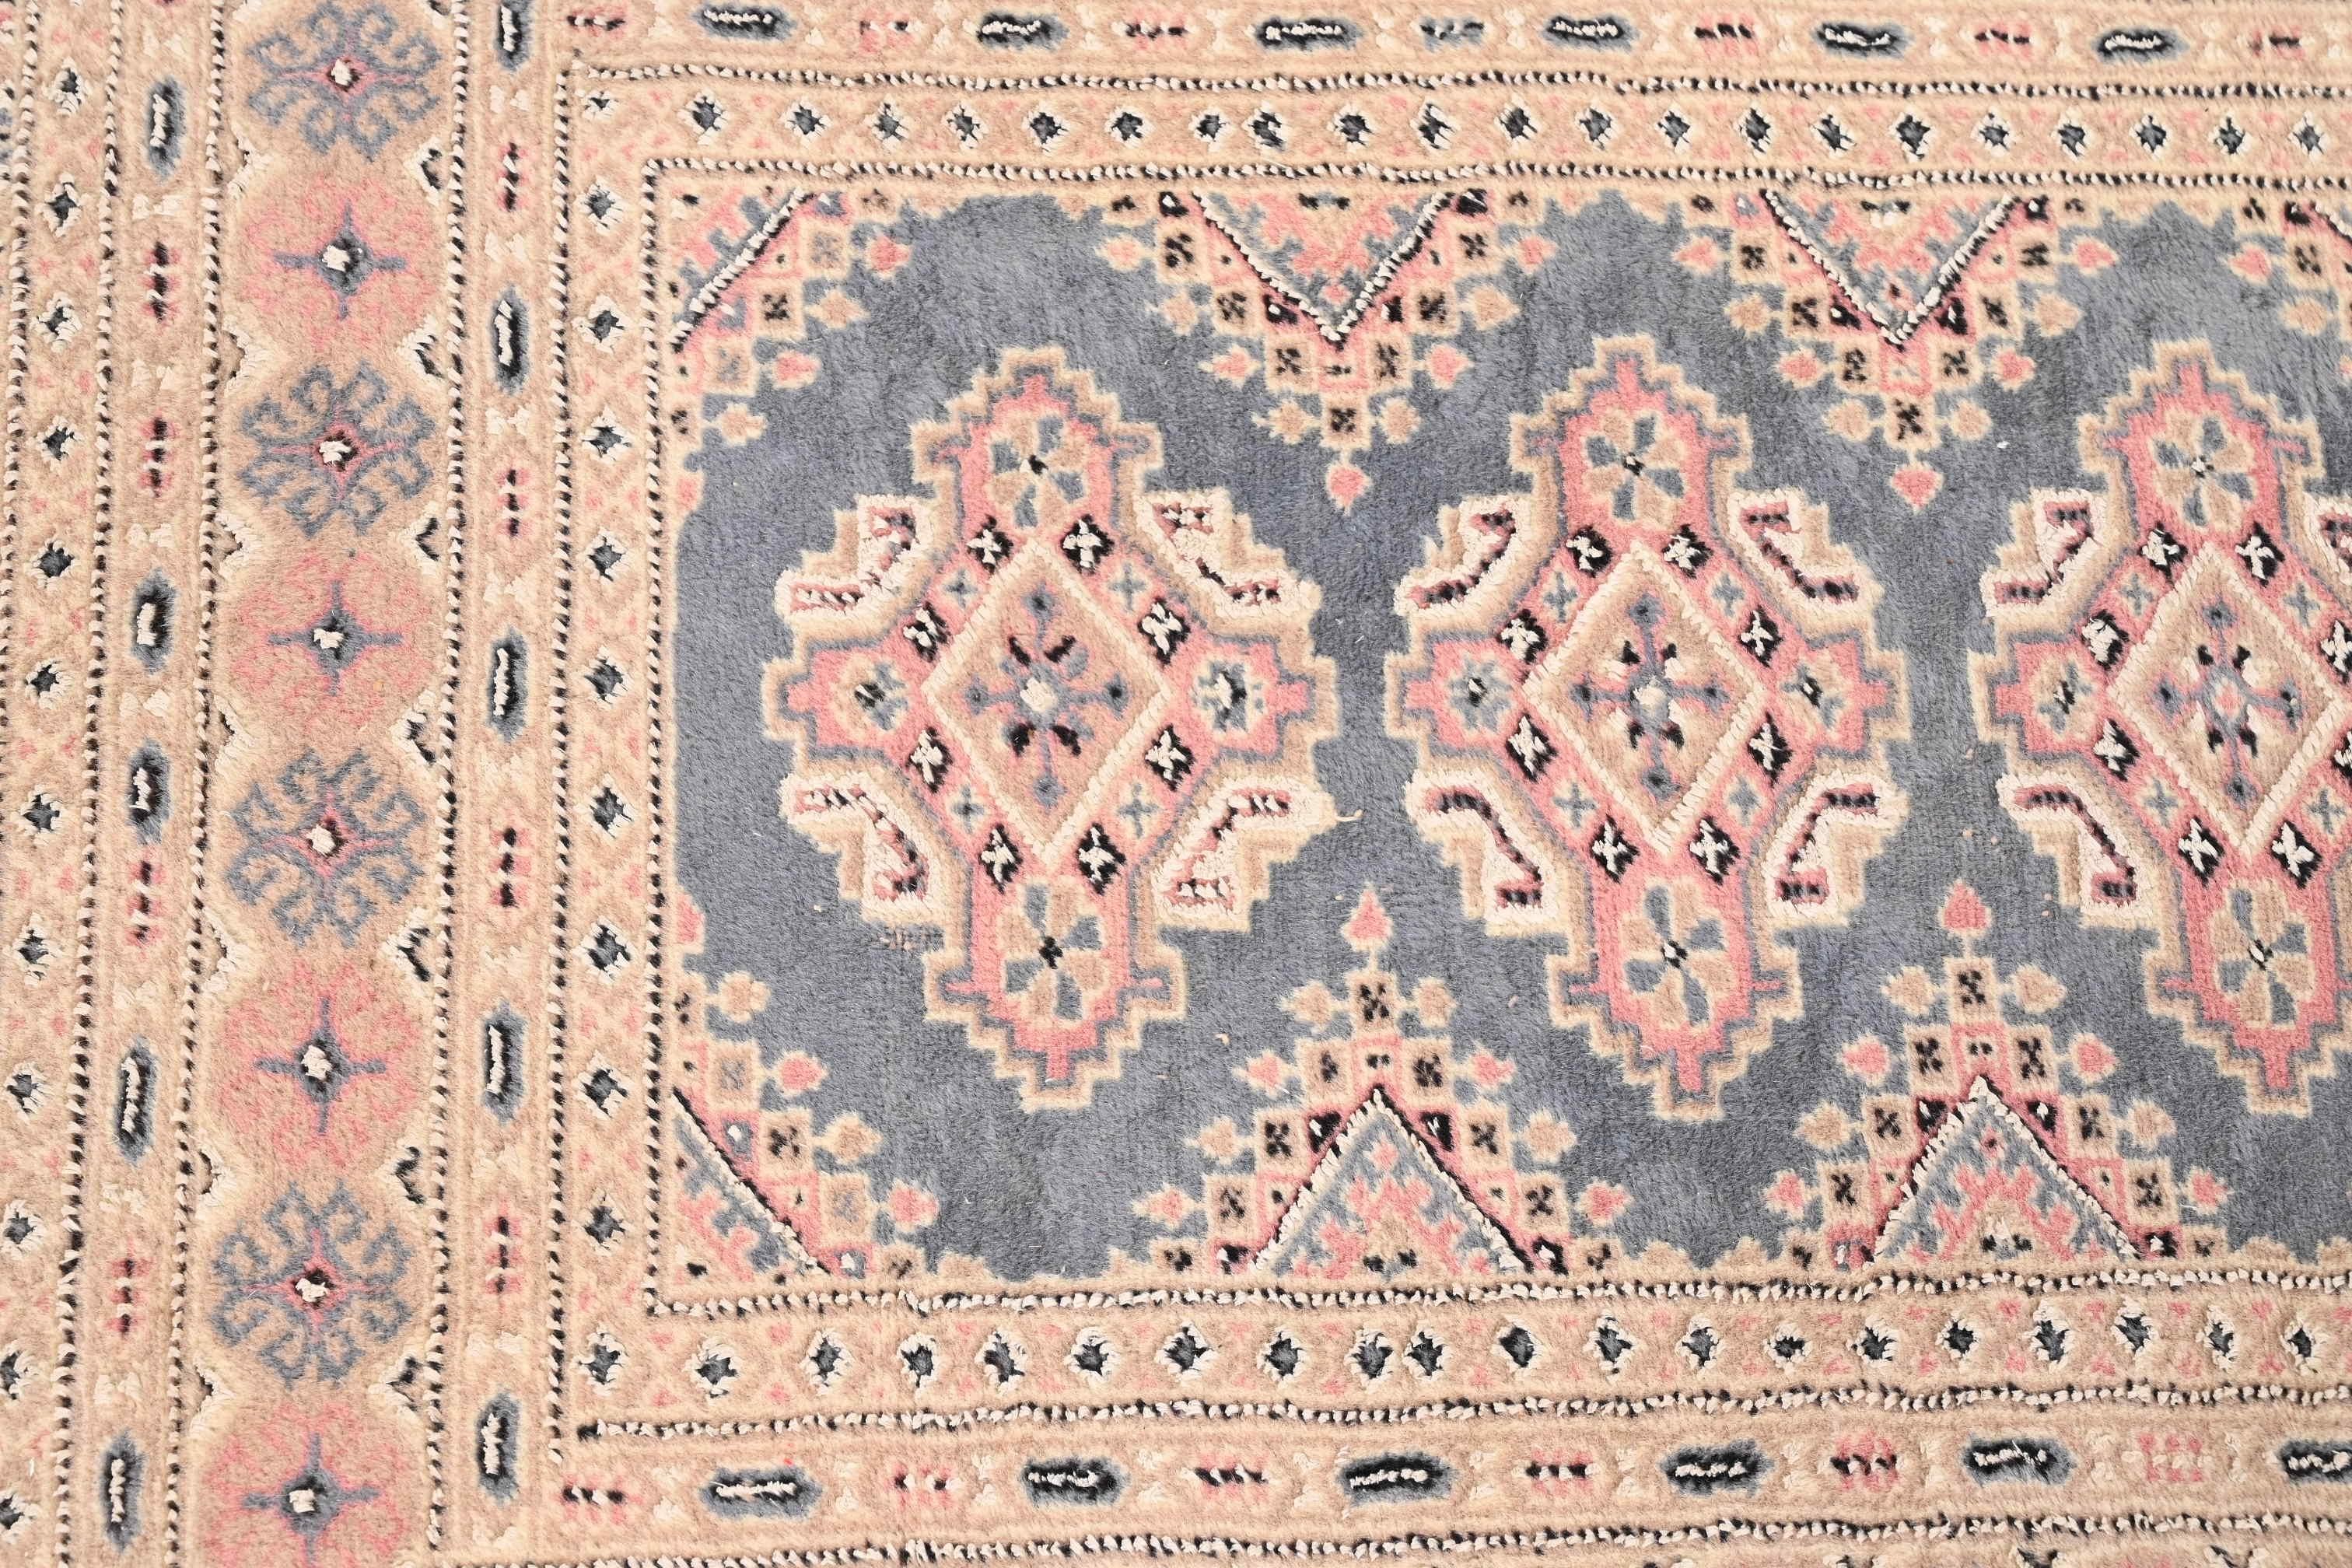 Vintage Hand-Woven Persian Bokhara Wool Rug in Light Blue, Pink, and Cream 2